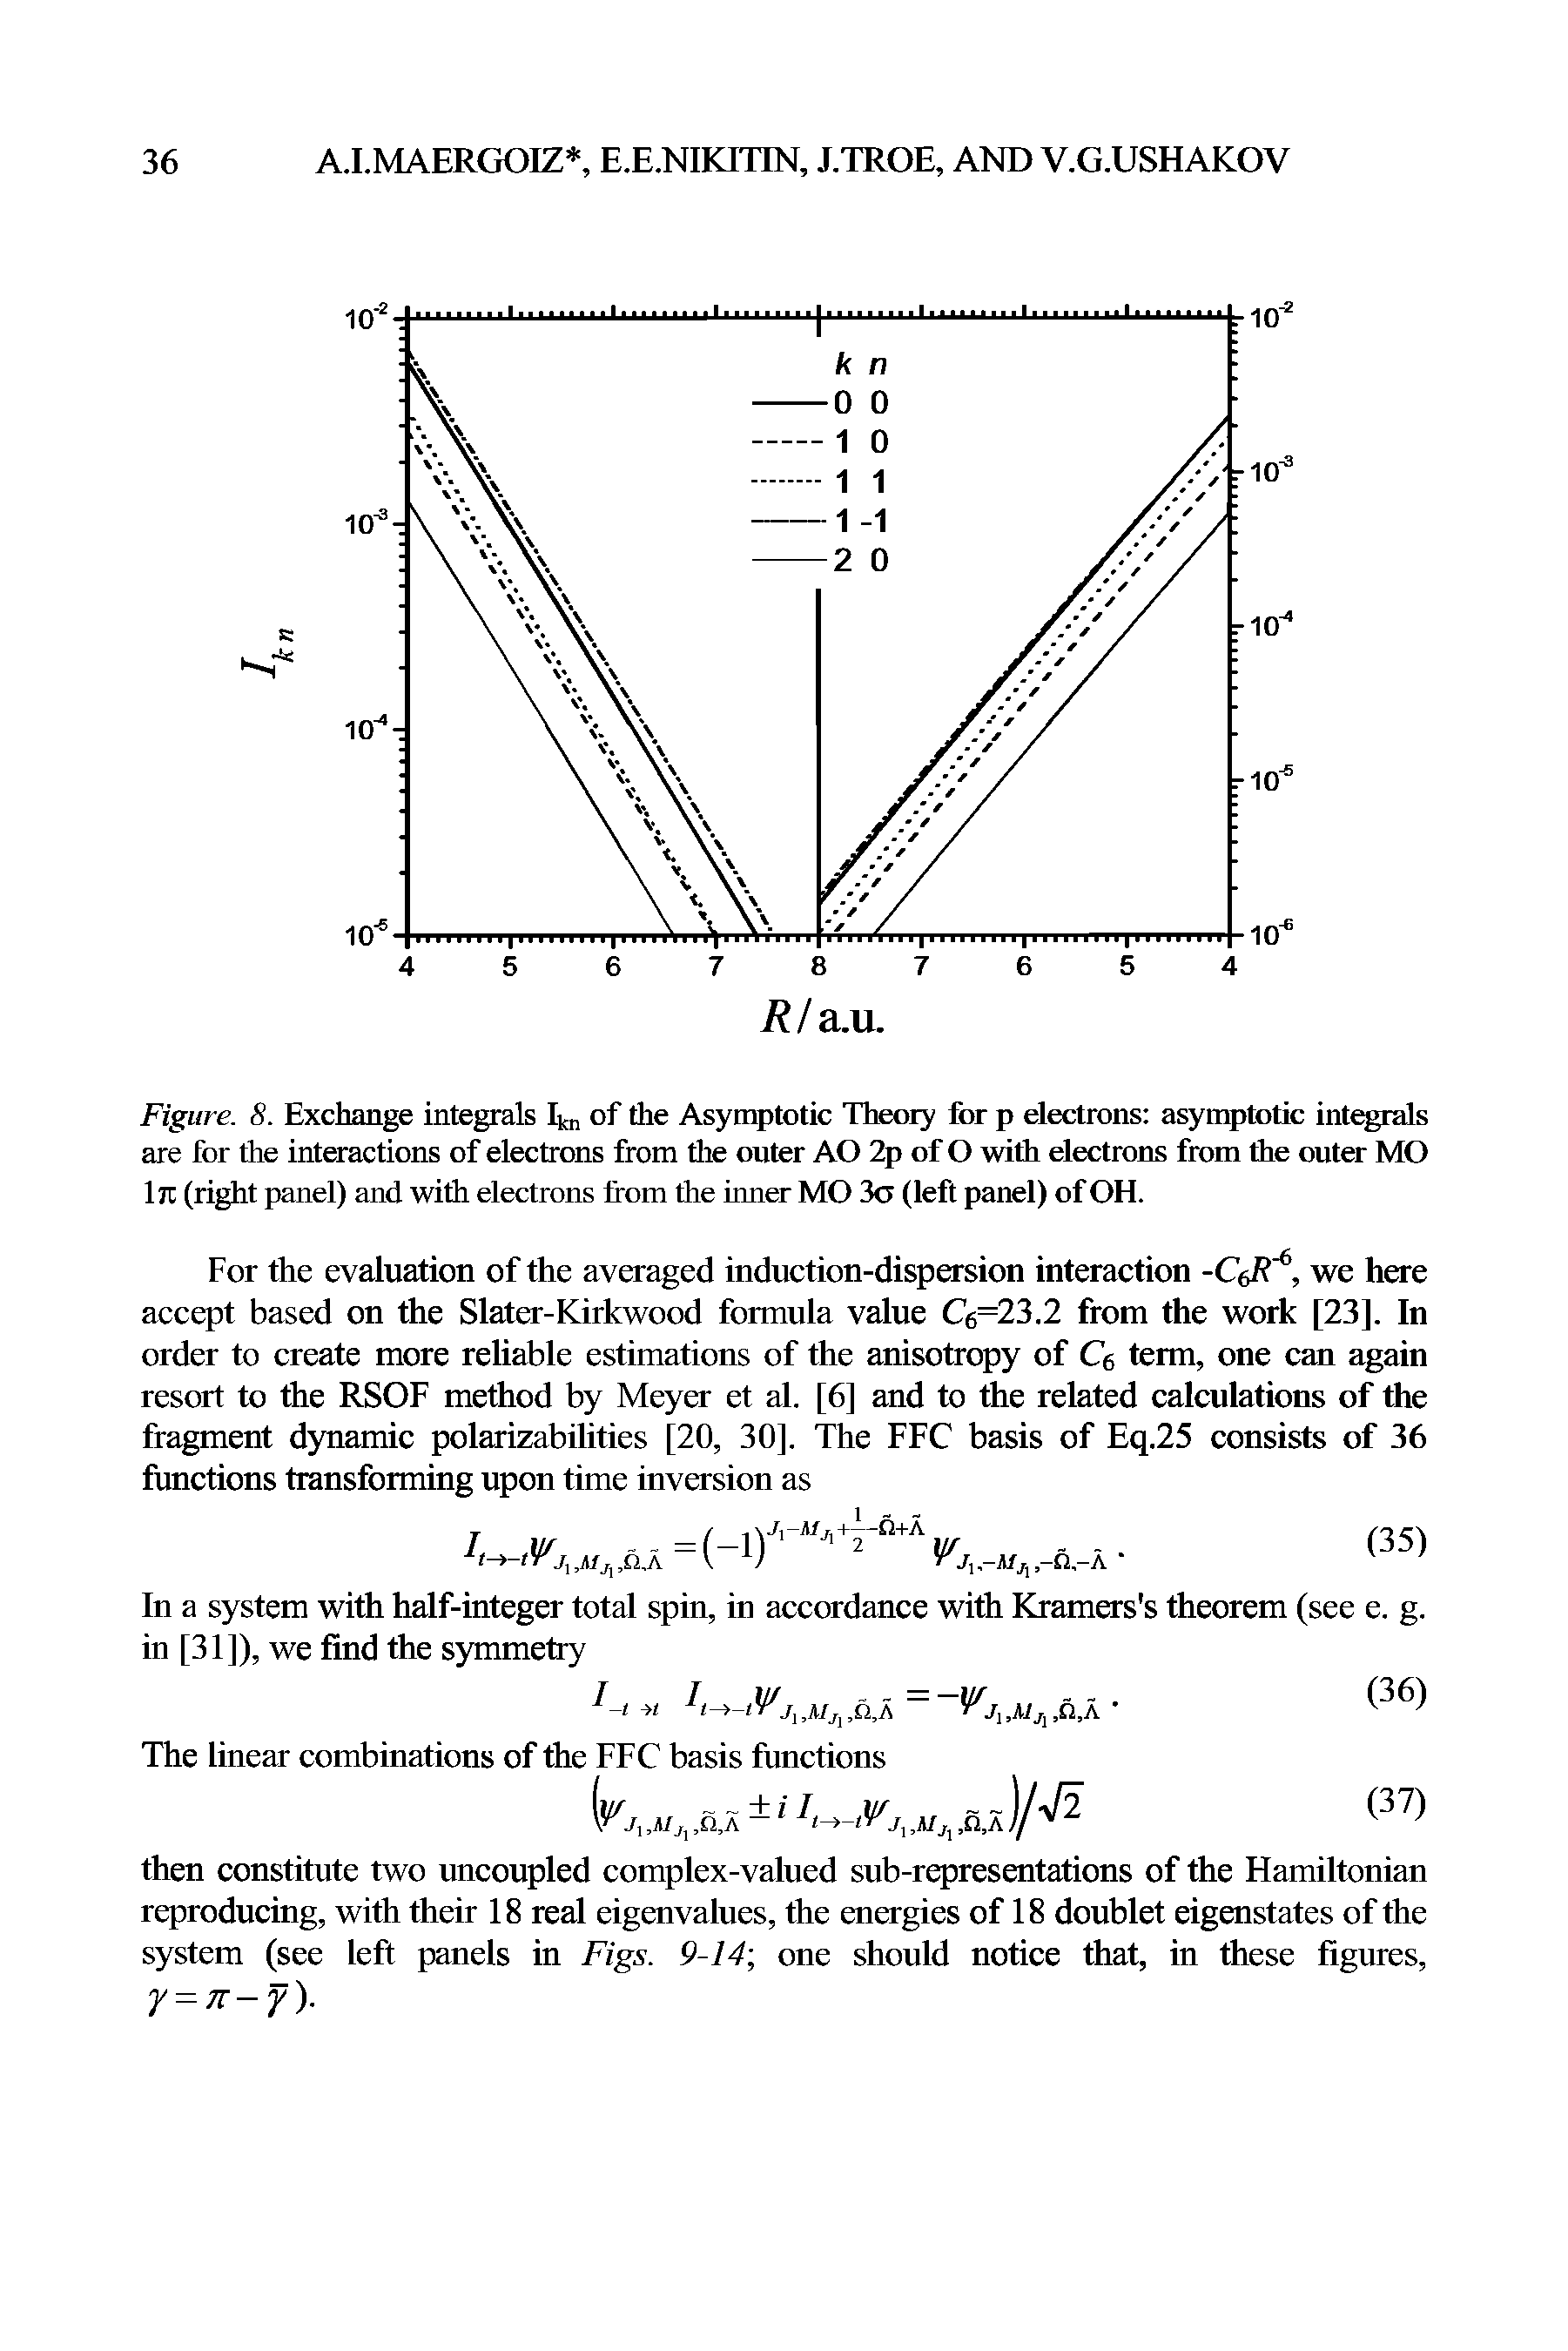 Figure. 8. Exchange integrals I n of the Asymptotic Theory for p electrons asymptotic integrals are for the interactions of electrons from tire outer AO 2p of O with electrons from the outer MO Iti (right panel) and with electrons from the inner MO 3o (left panel) of OH.